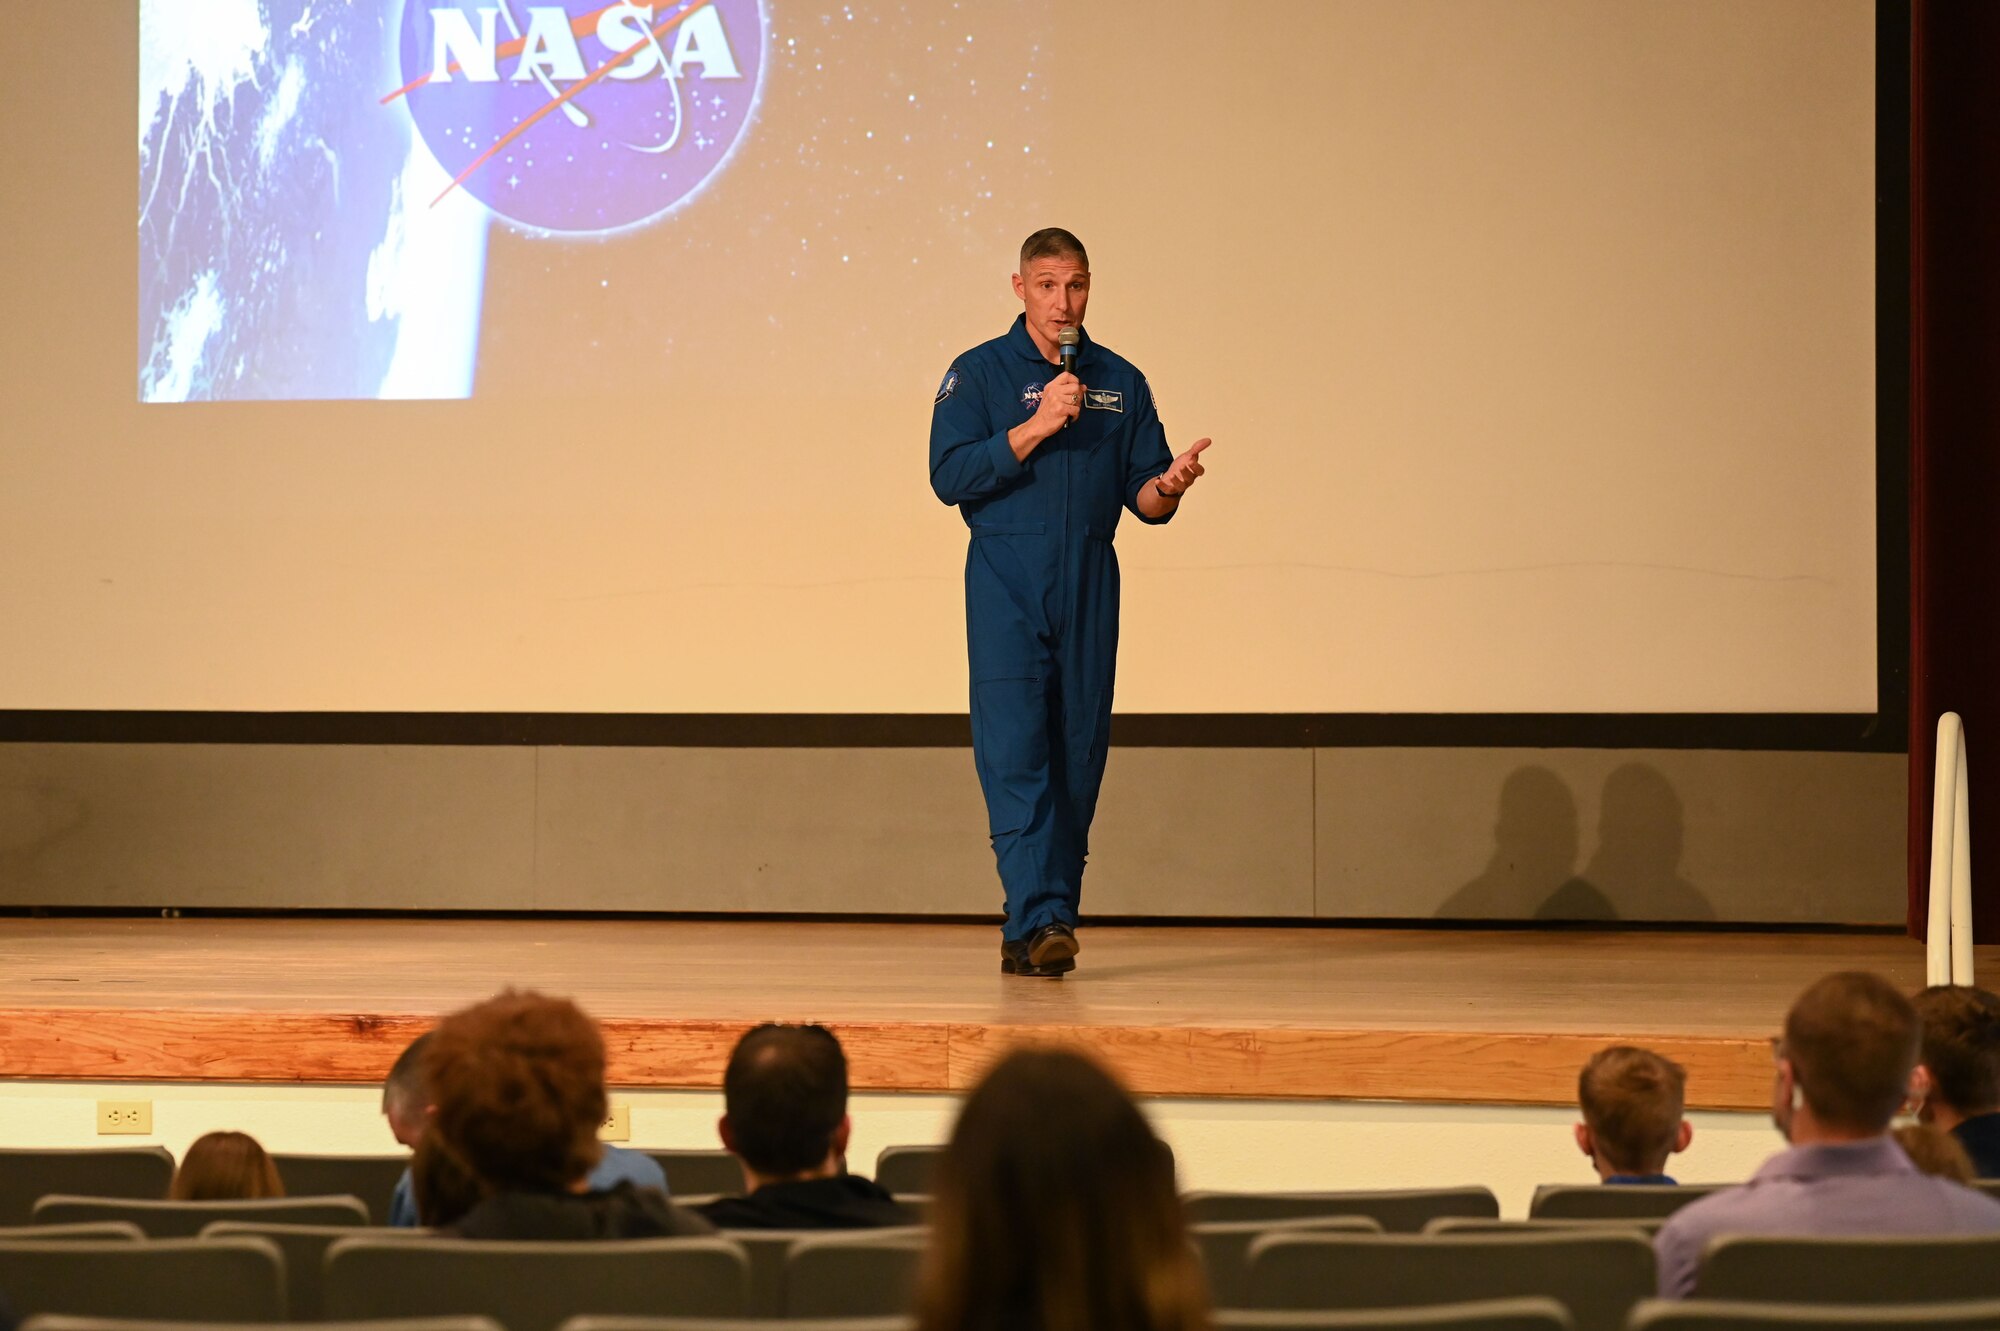 Man stands in front of NASA presentation.